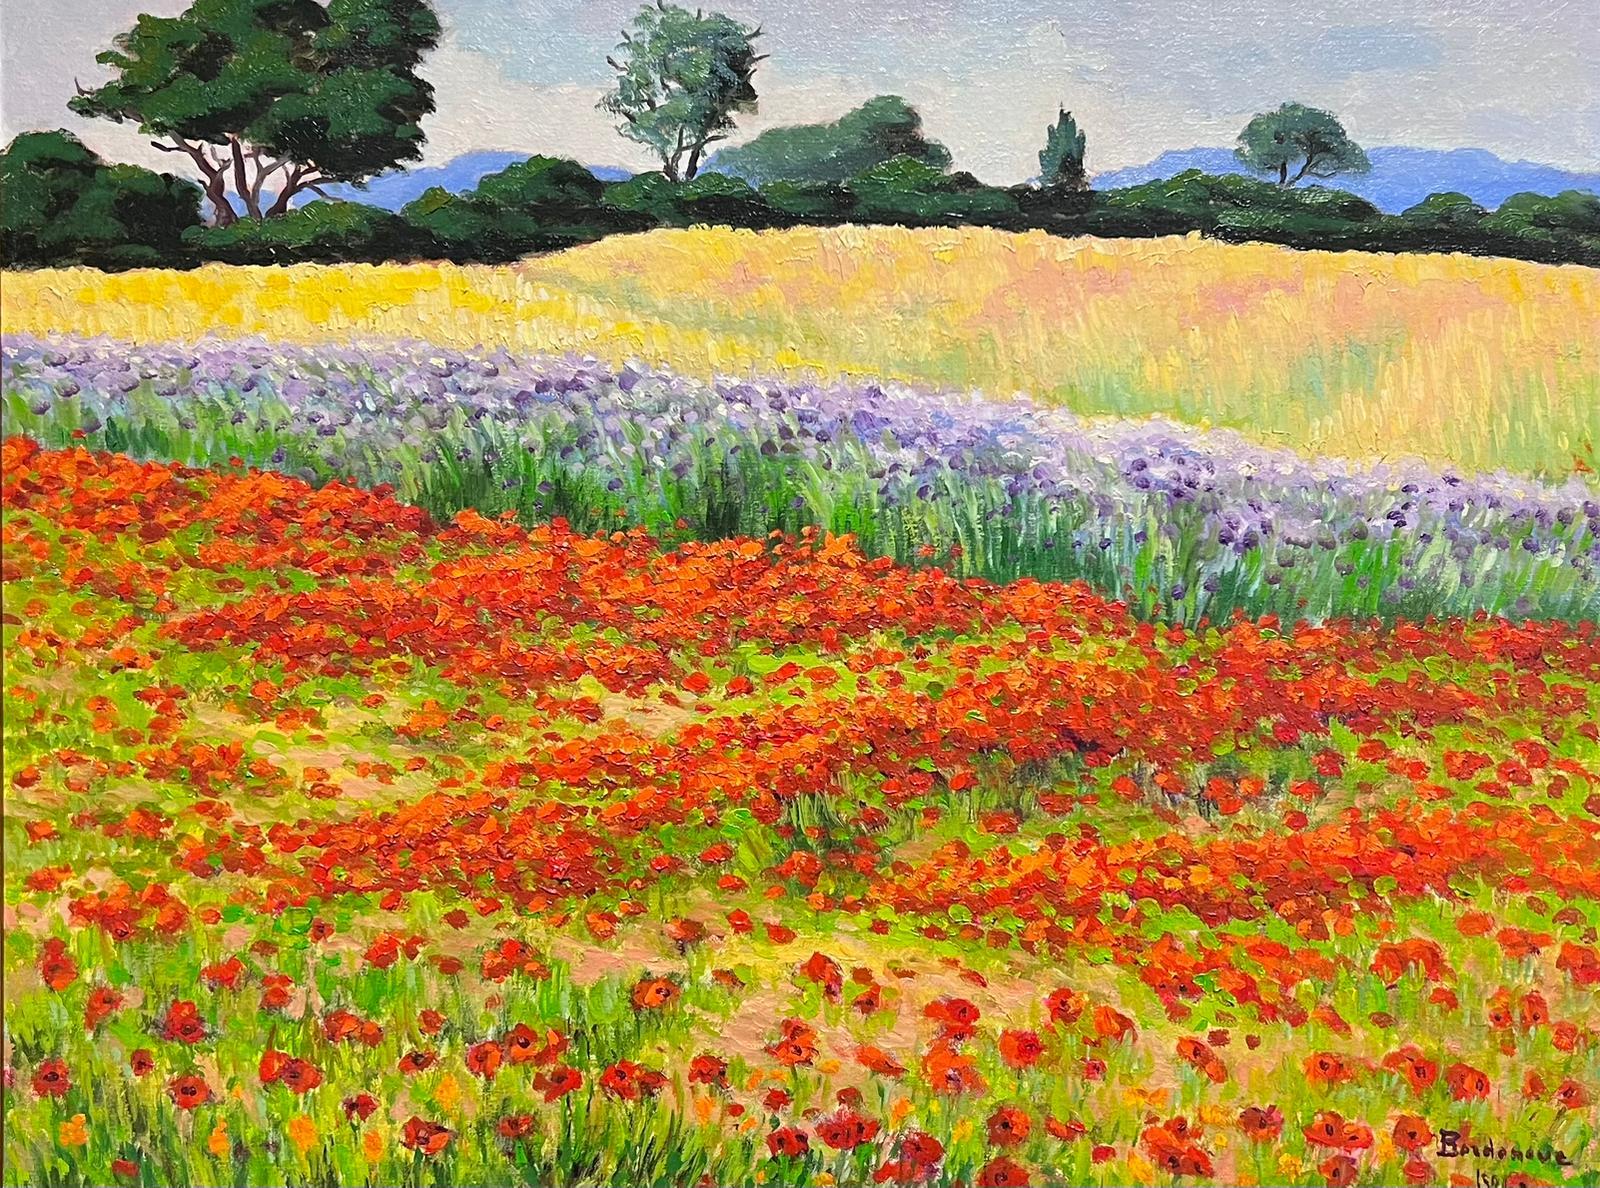 The Poppy Field
by Georges Bordonave (French contemporary artist)
signed oil on canvas, framed
framed: 28.5 x 34 inches
canvas: 20 x 26 inches
provenance: private collection, Paris
condition: excellent condition